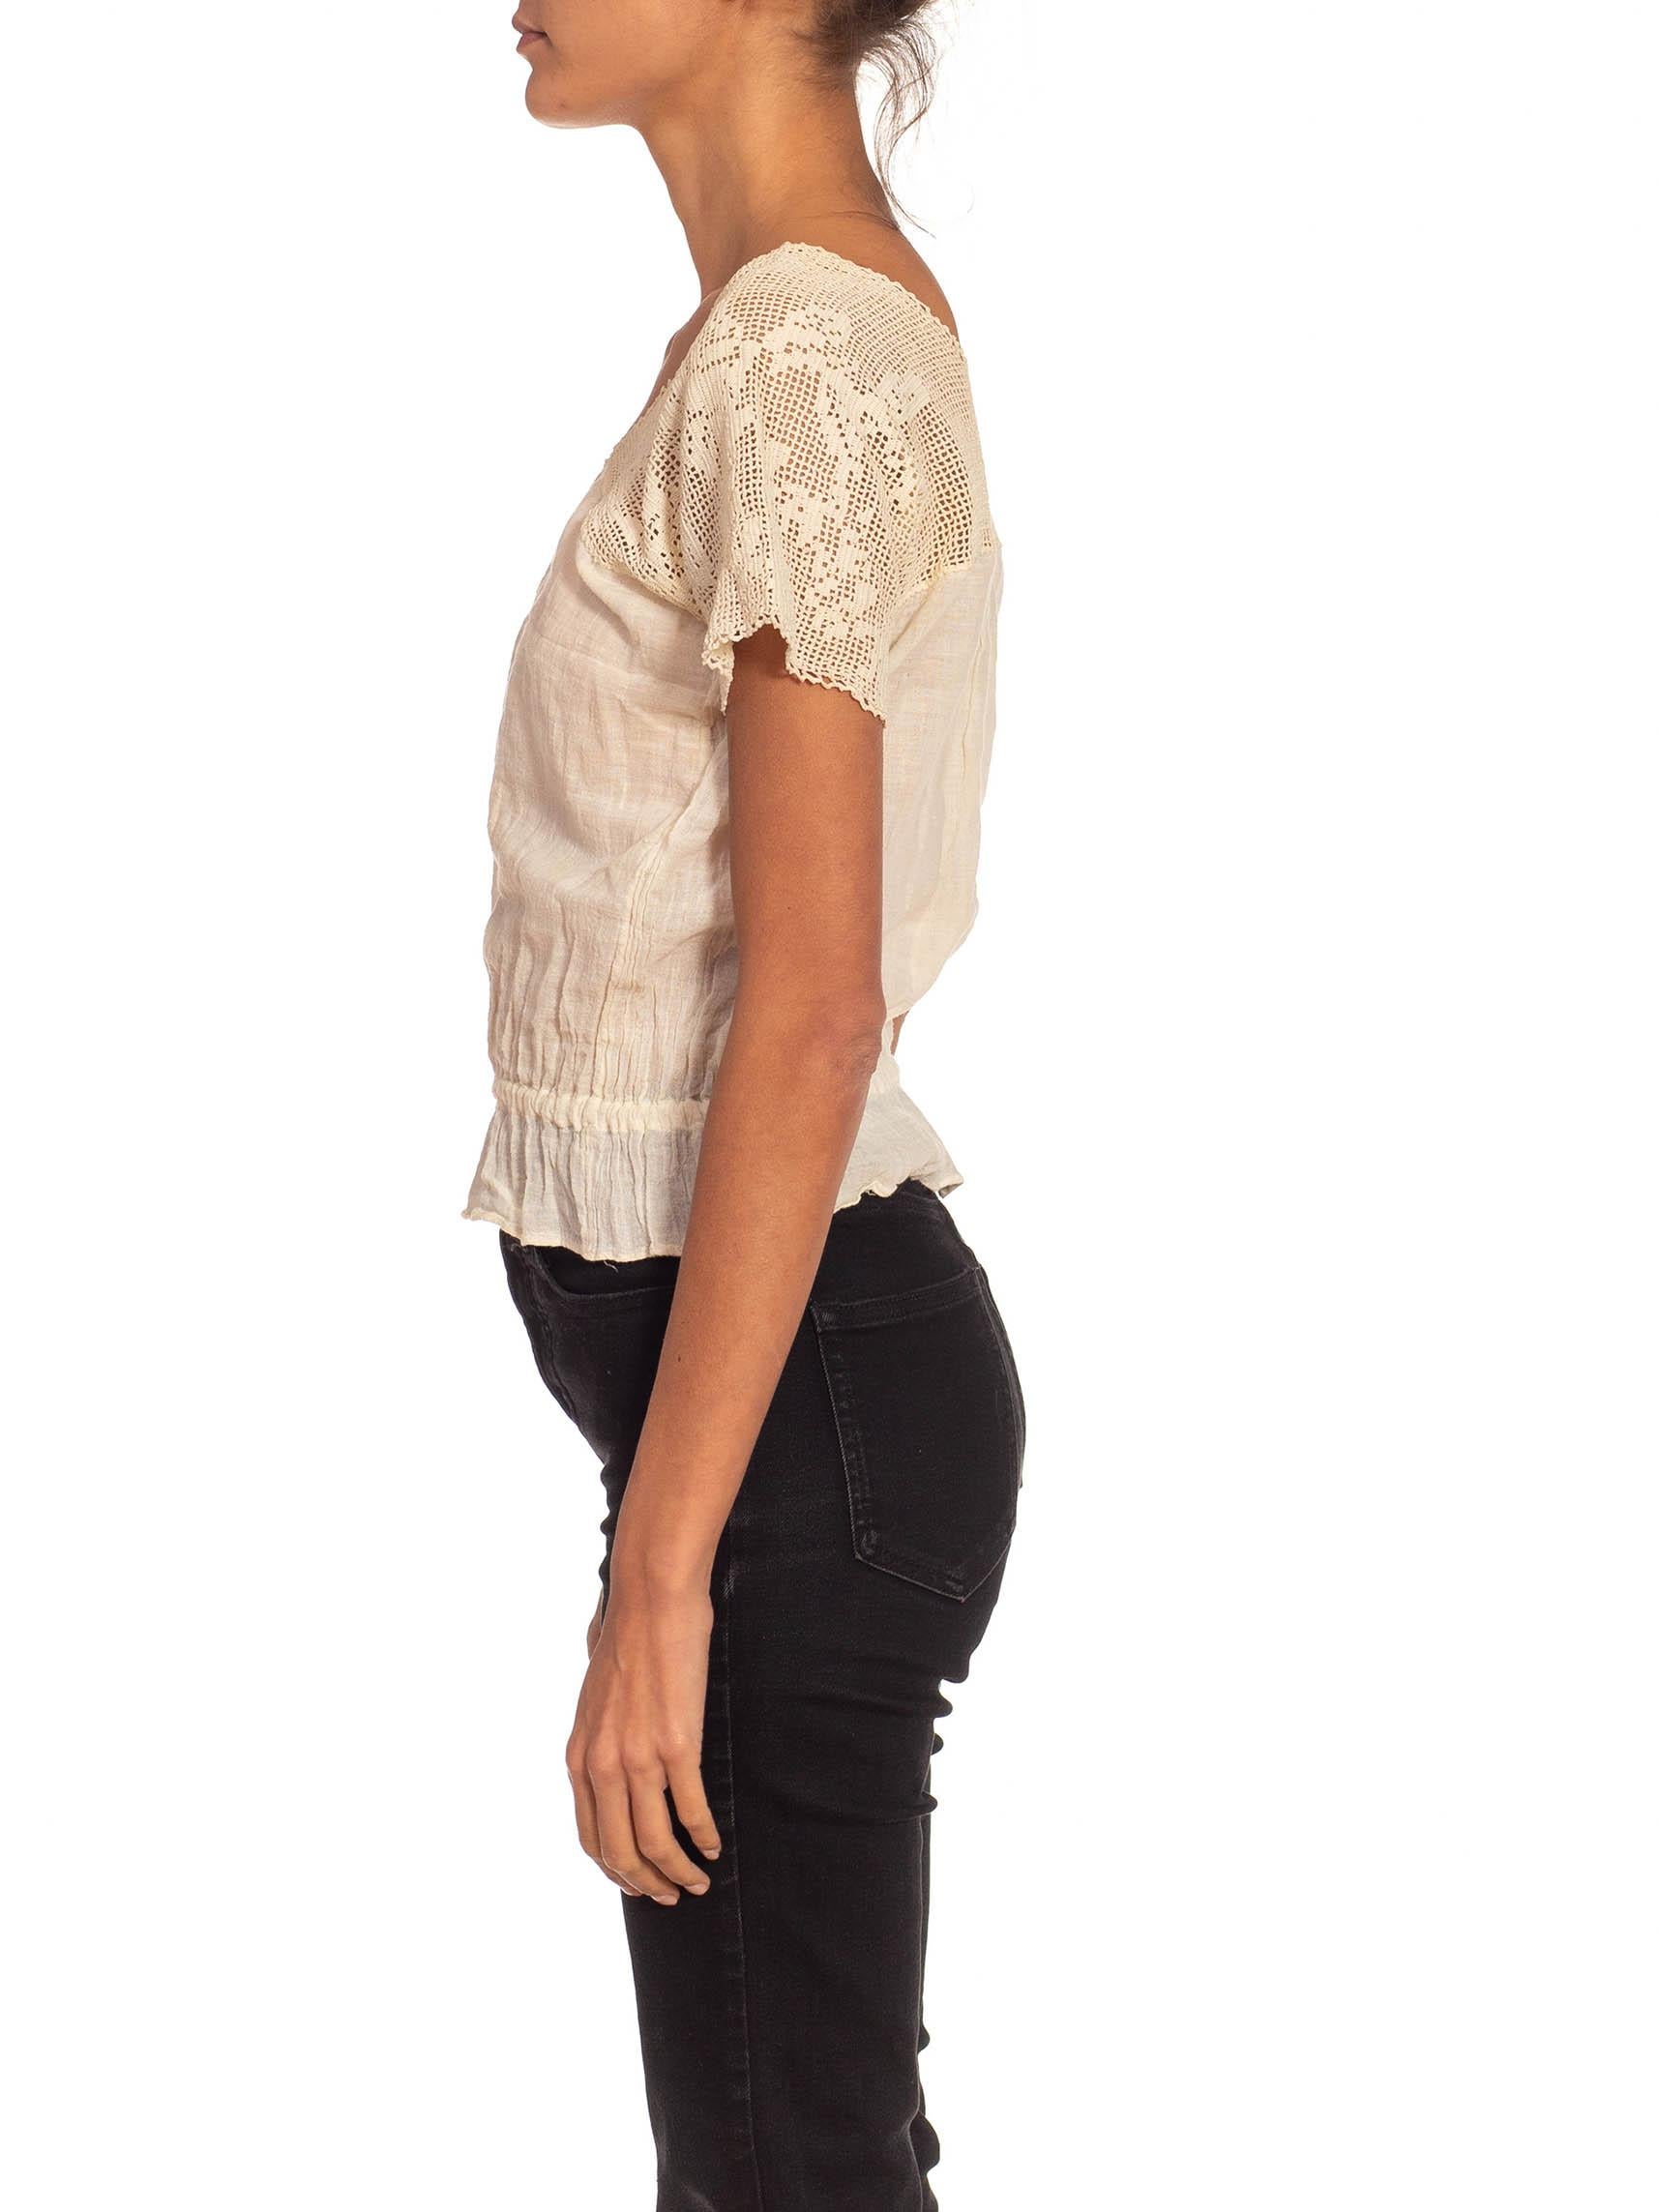 Victorian Off White Cotton Lace Top With Elastic Waist In Excellent Condition For Sale In New York, NY